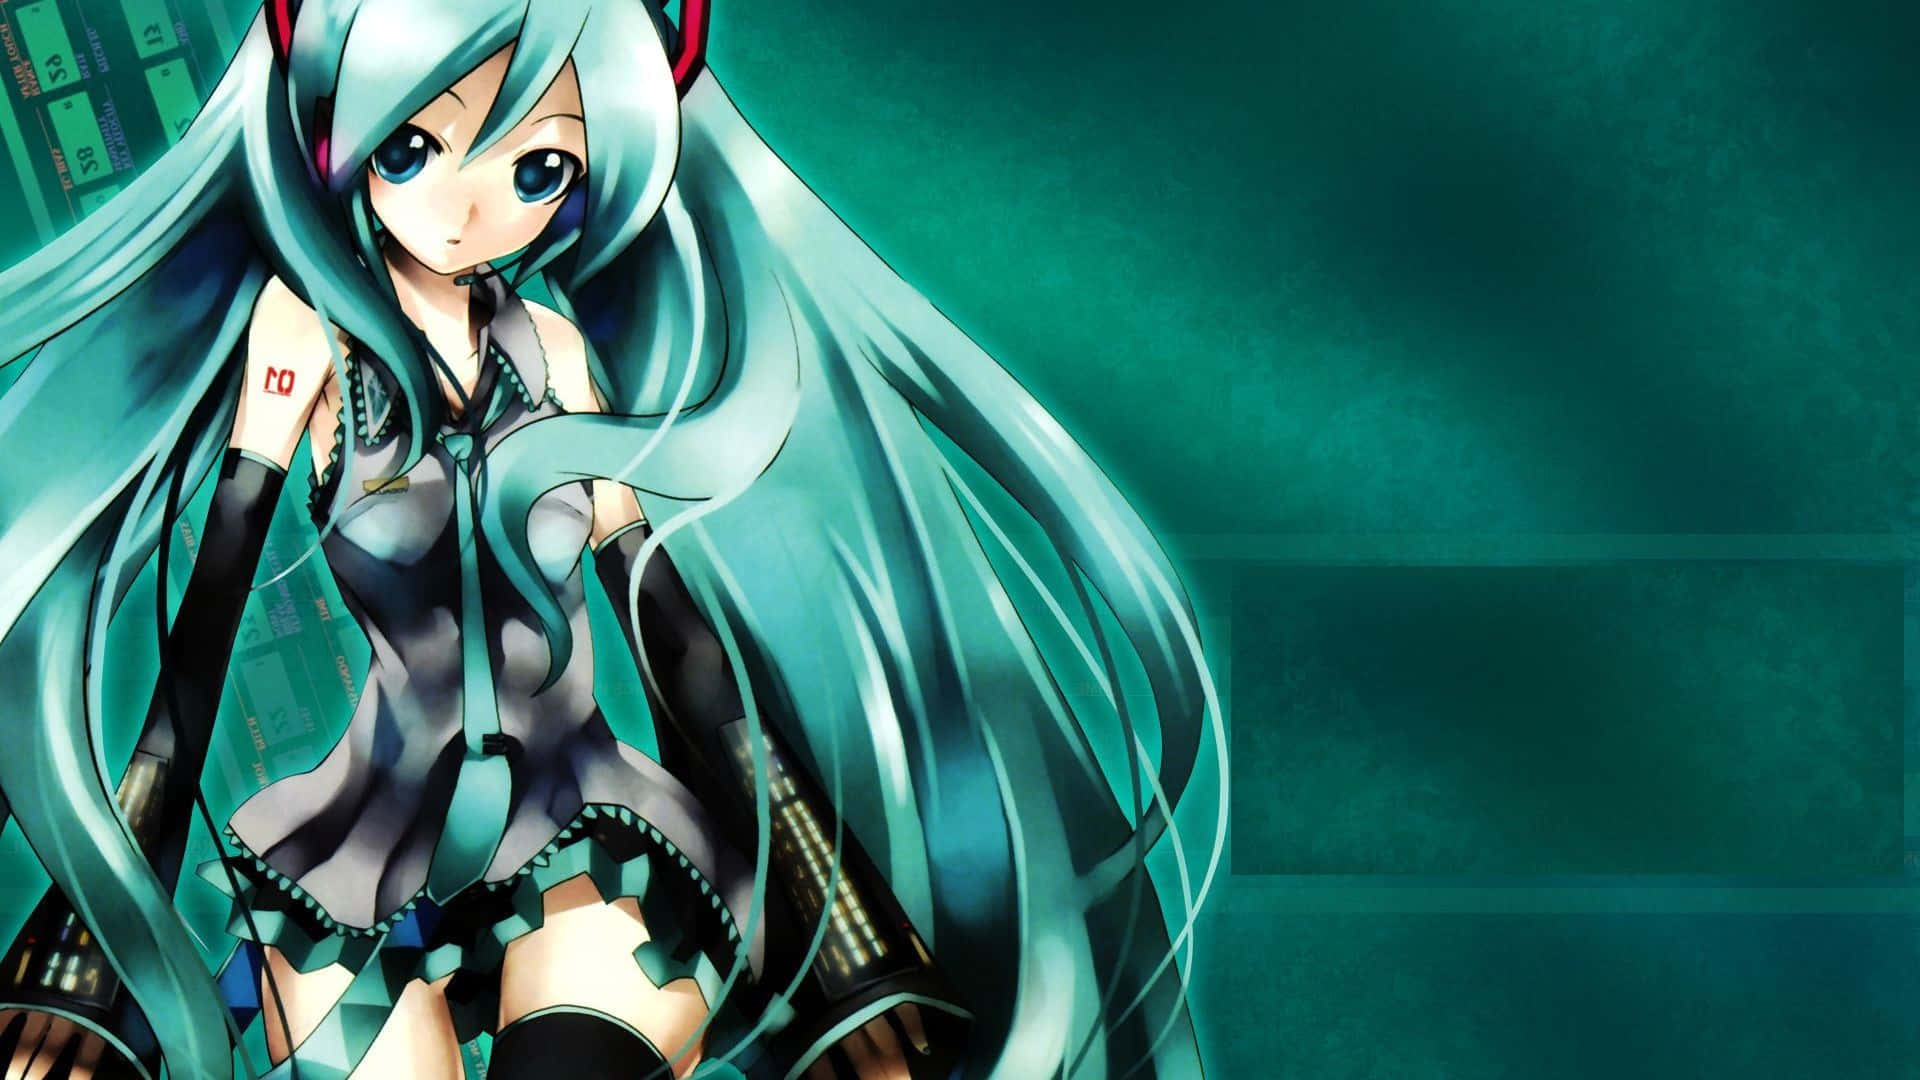 Hatsune Miku looks captivating in her signature outfit